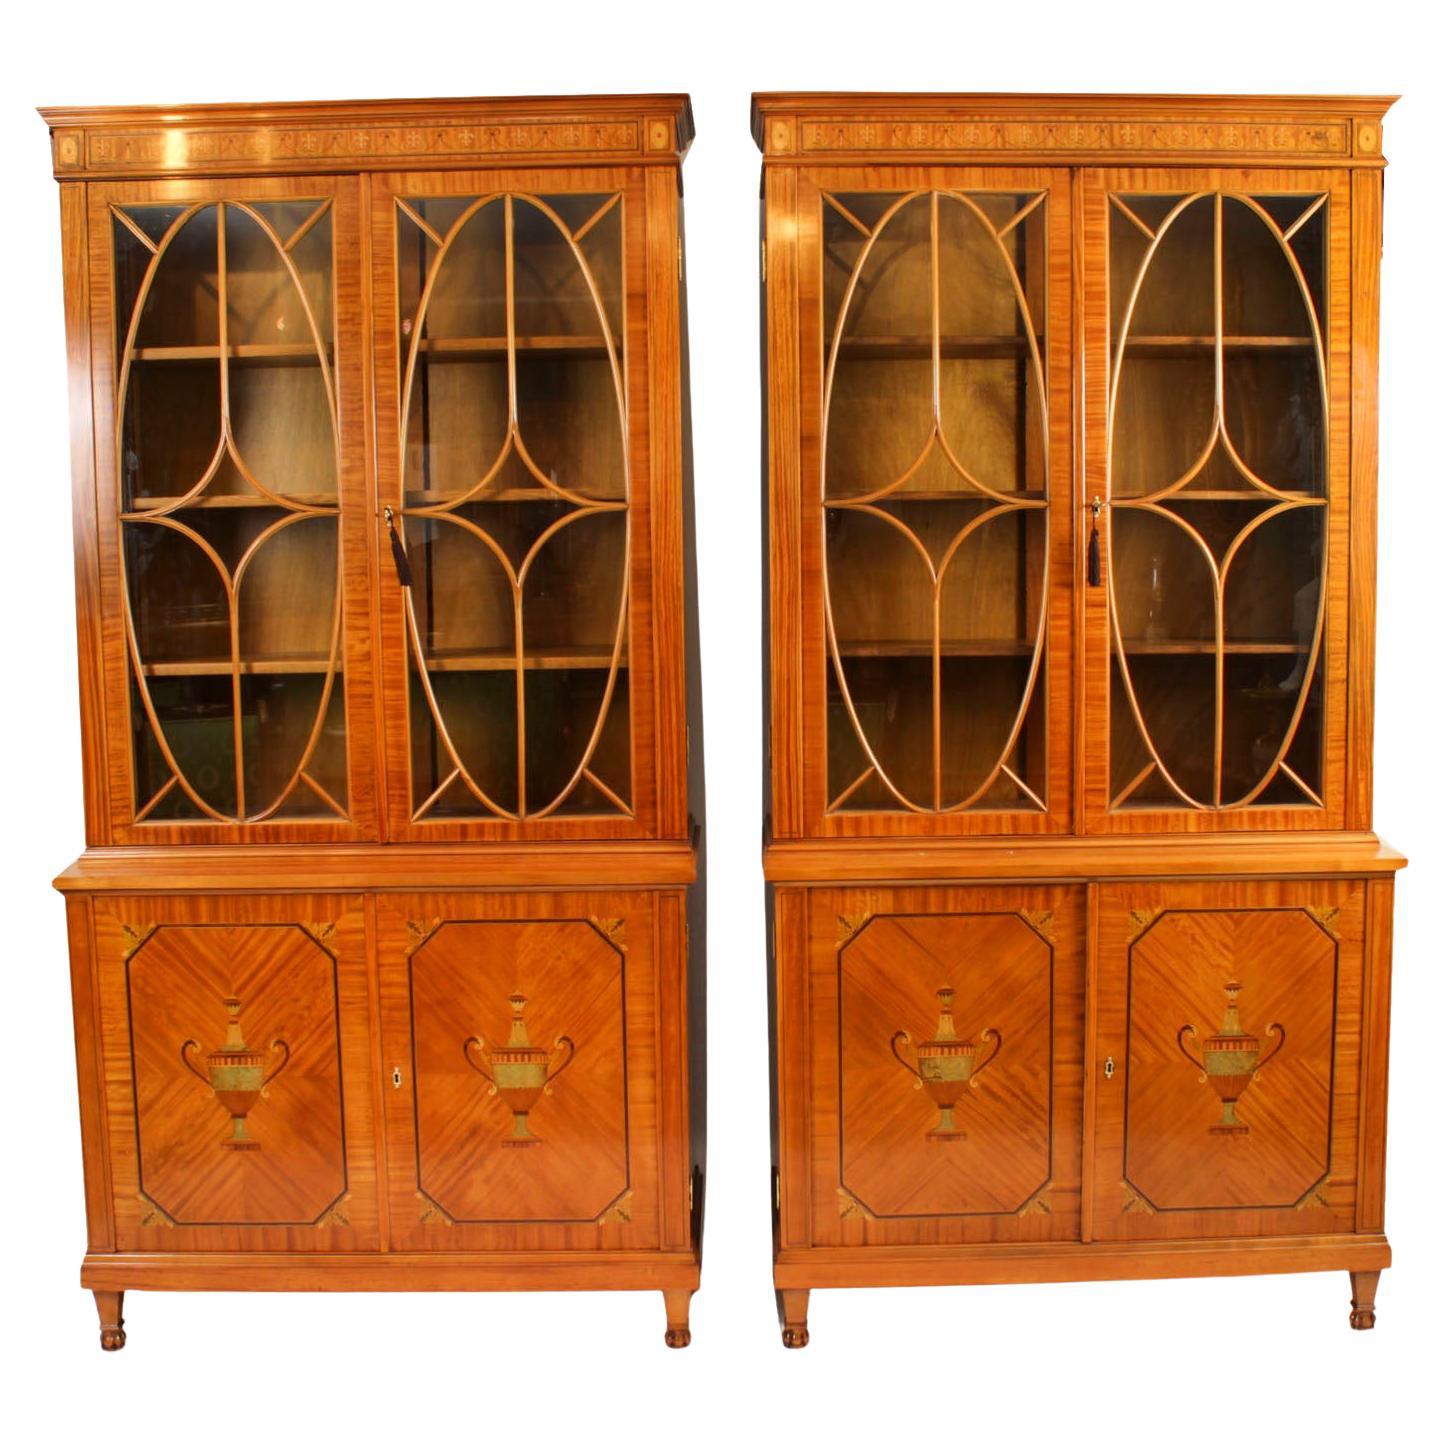 Antique Pair Edwardian Inlaid Satinwood Bookcases by Maple & Co Early 20th C